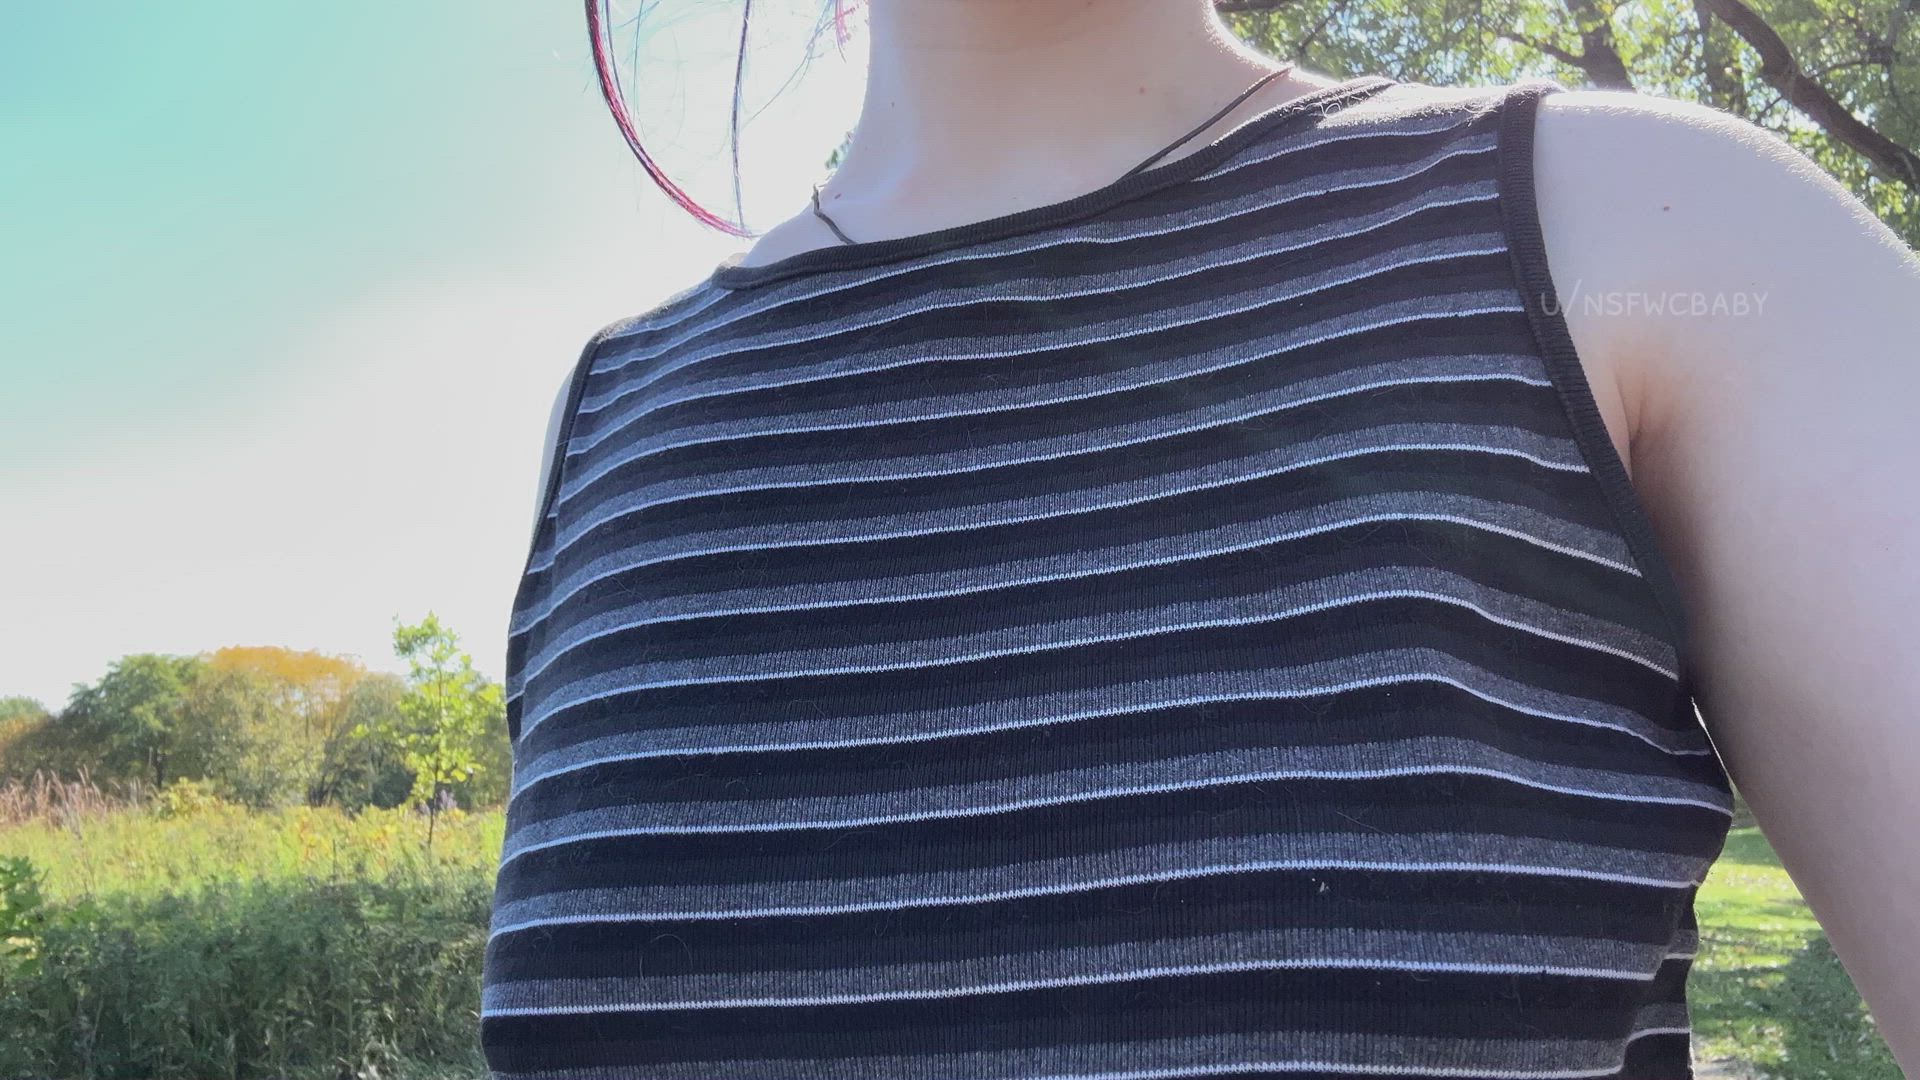 Braless porn video with onlyfans model Babyc33 <strong>@babyc33</strong>